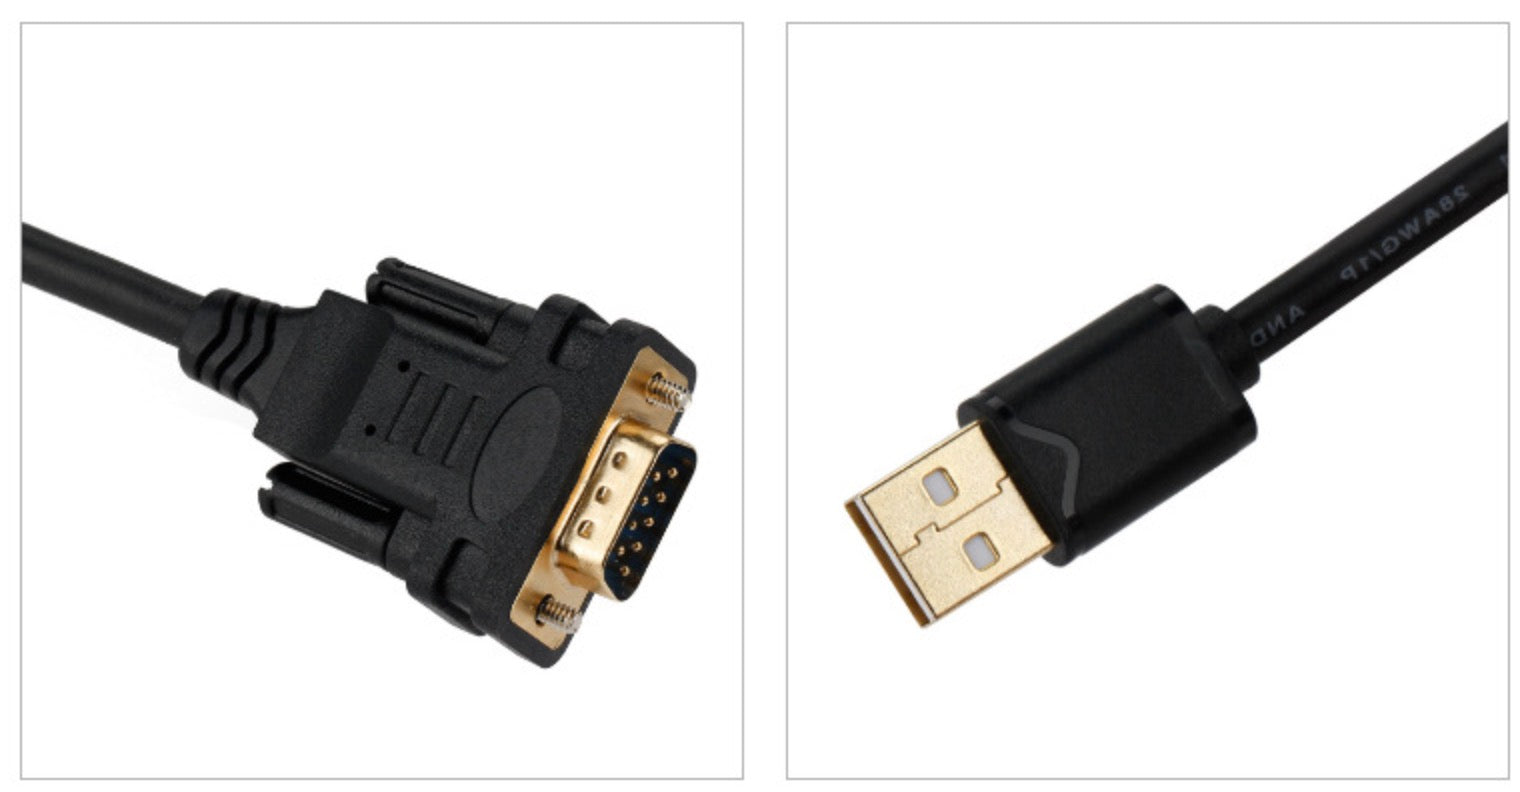 USB 2.0 A Male to DB9 RS232 Male Serial Cable with FTDL Chipset